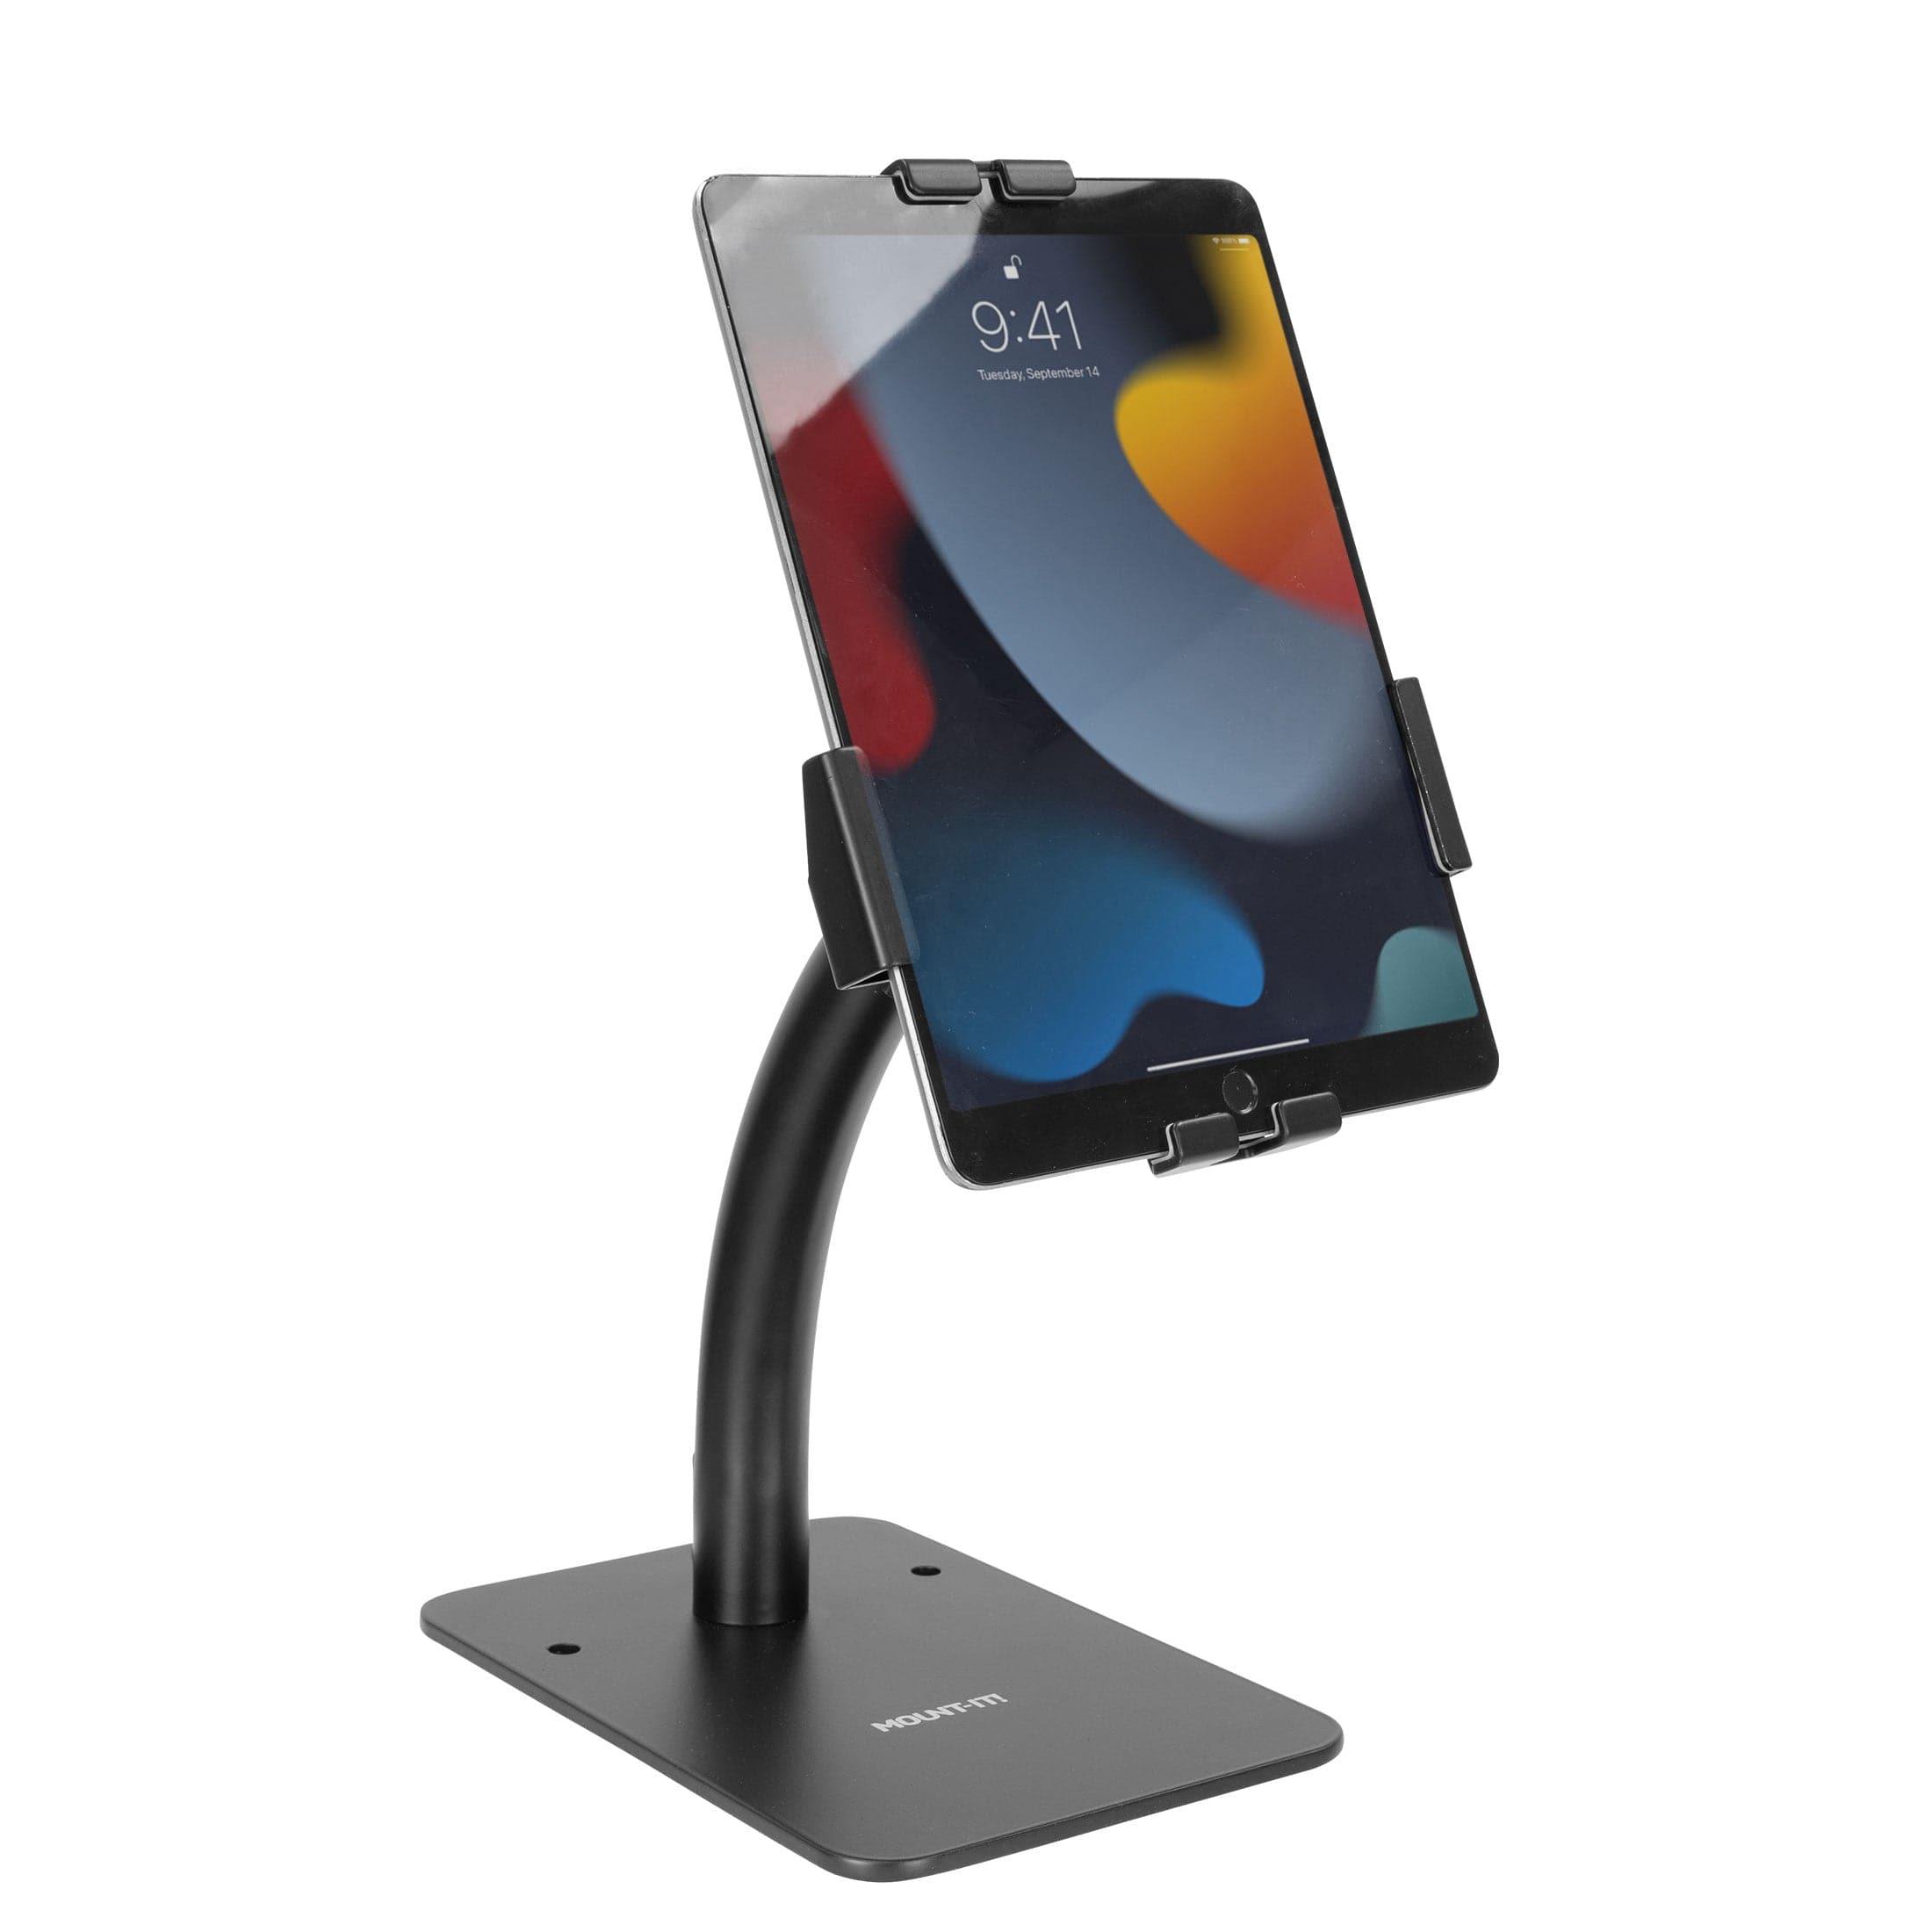 Anti-Theft Tablet Countertop Kiosk Stand